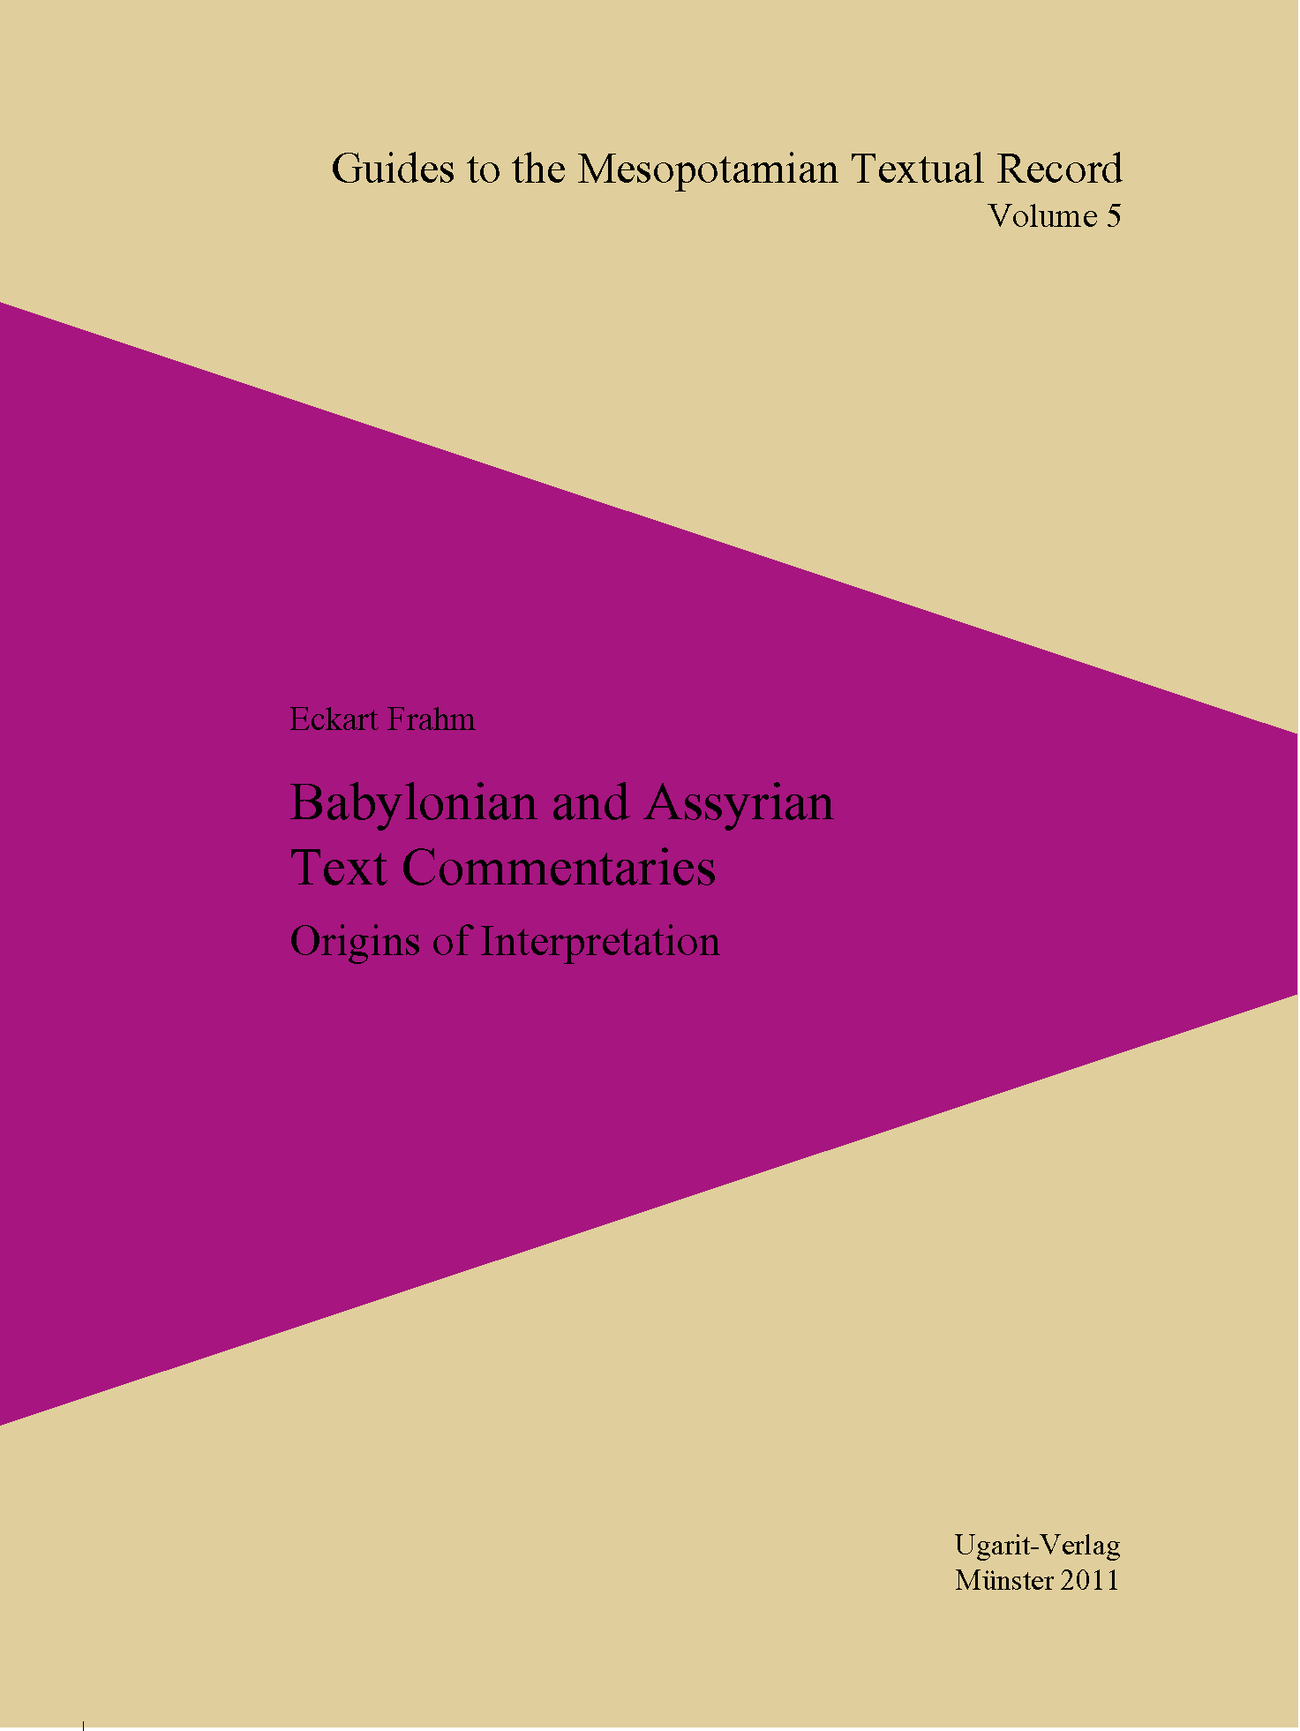 Babylonian and Assyrian Text Commentaries - Origins of